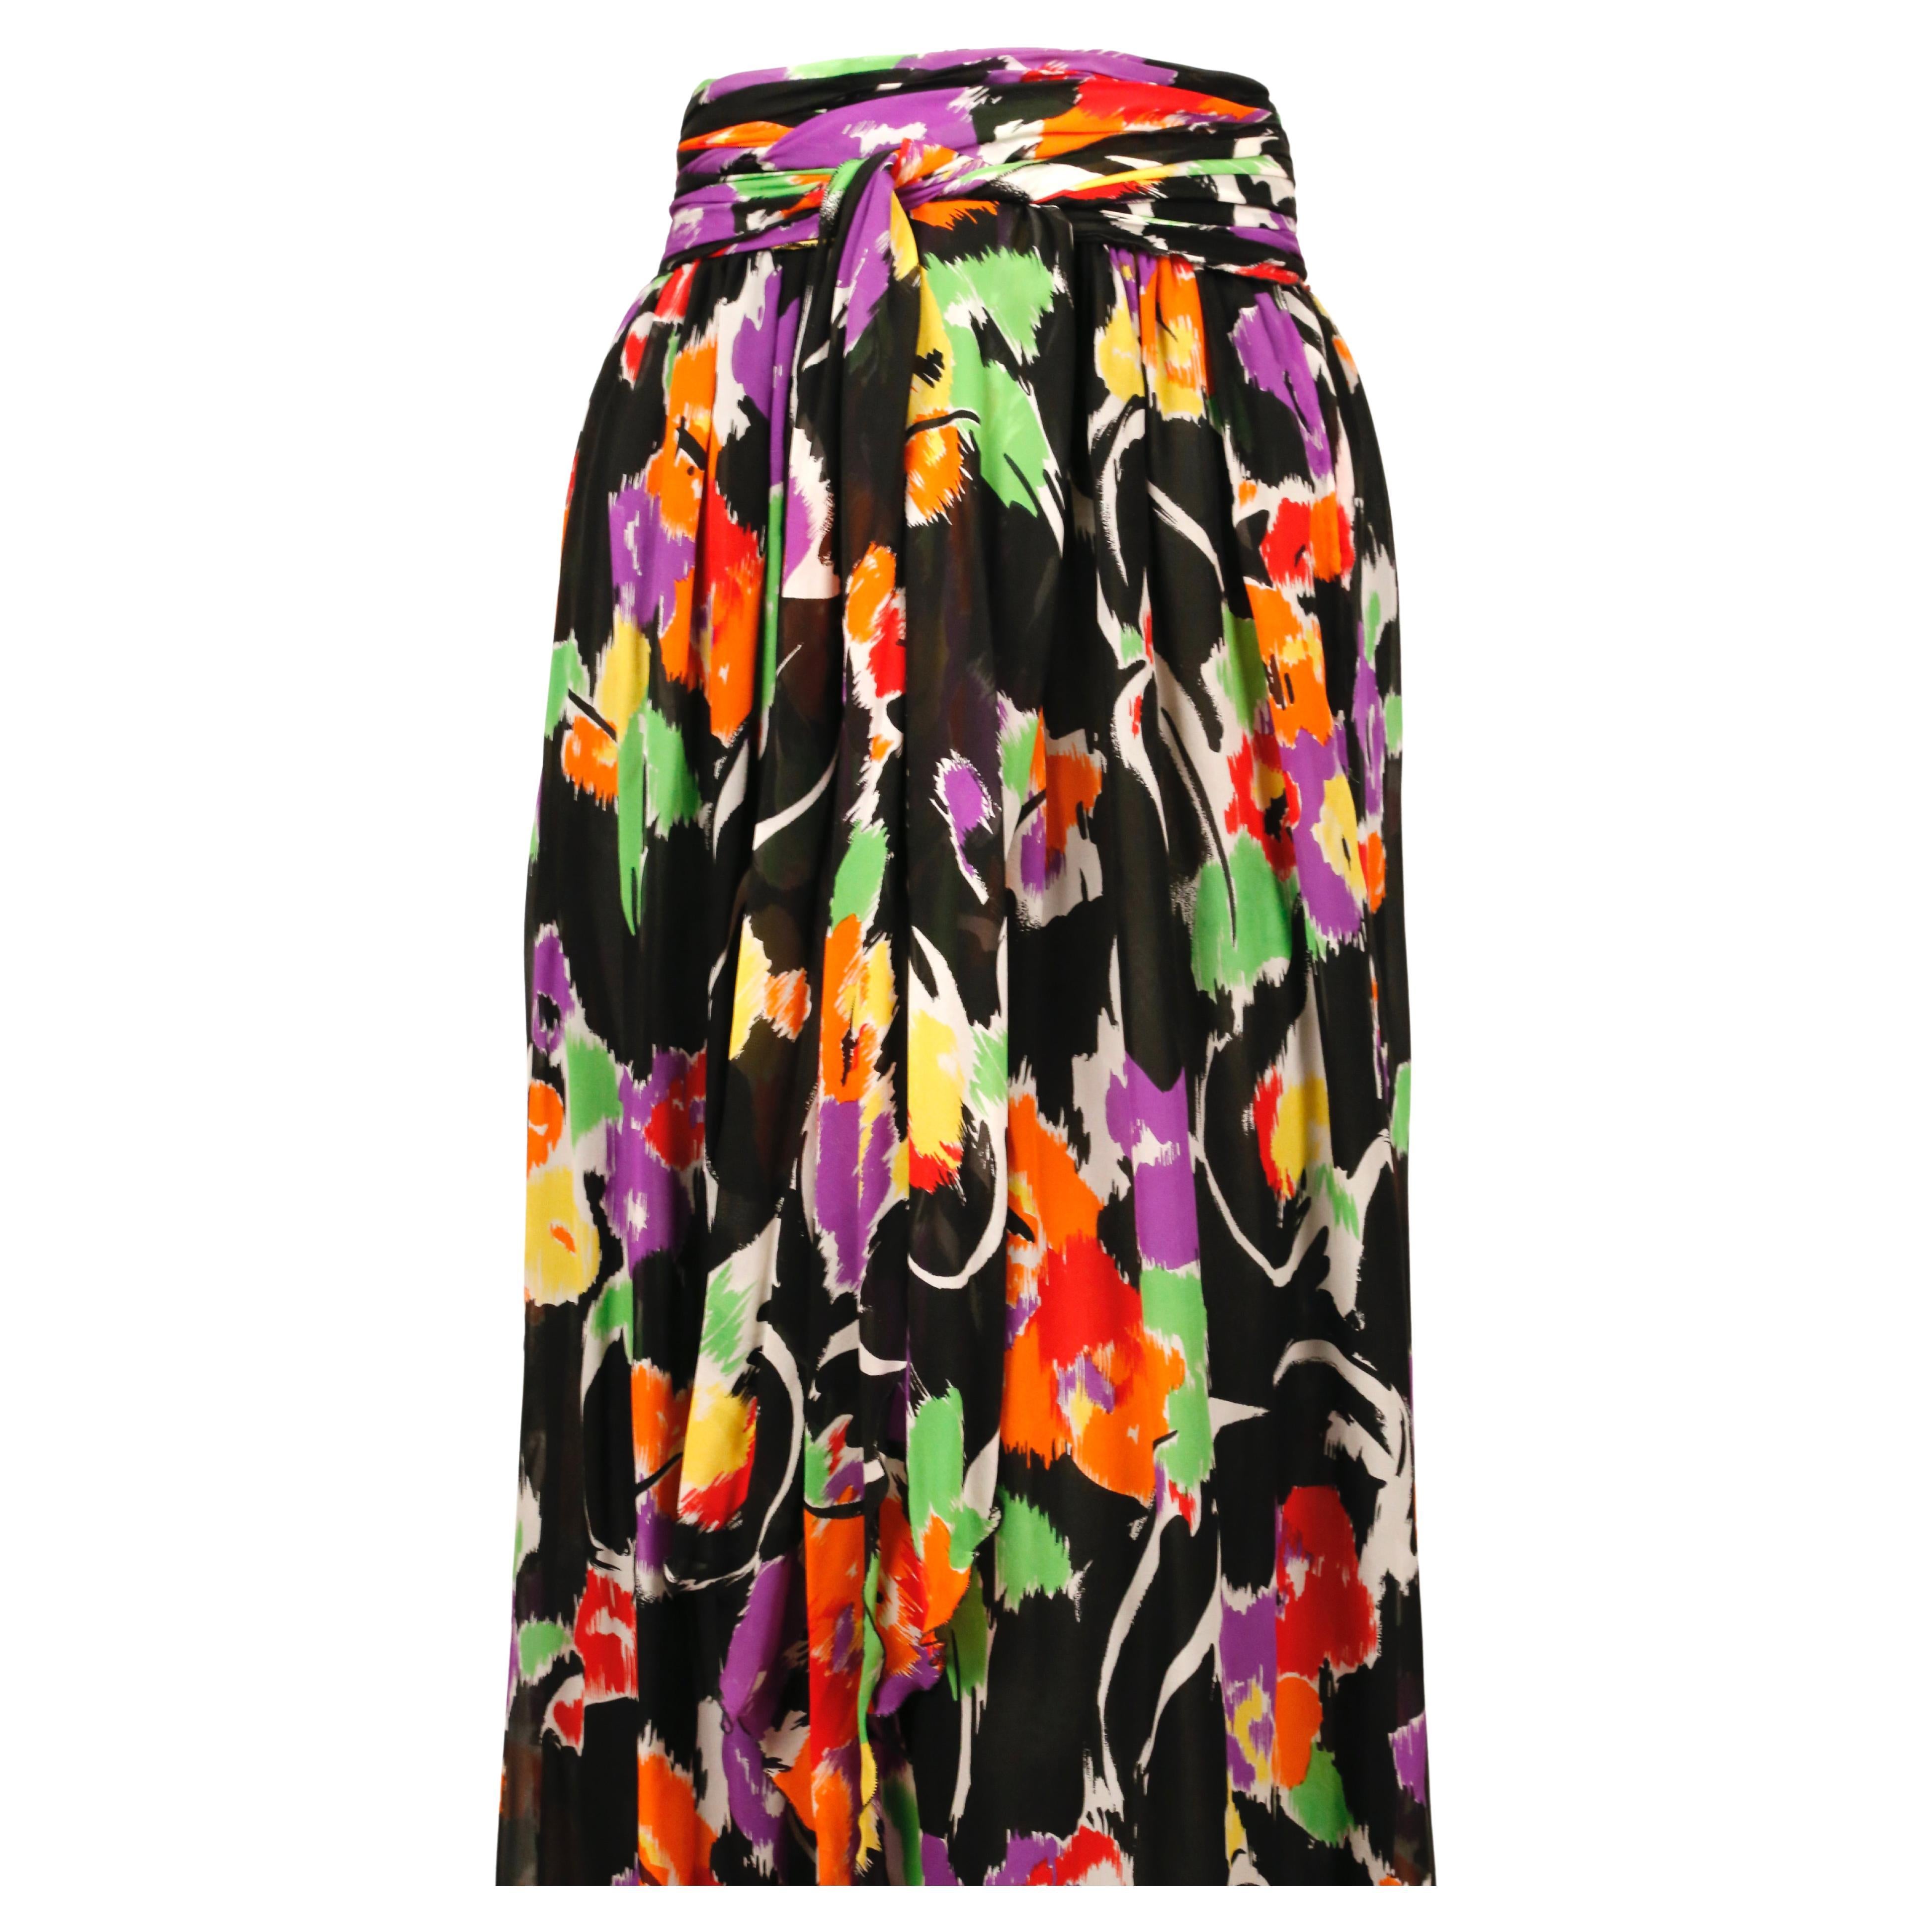 Floral printed, silk mousseline, maxi length skirt from Valentino dating to the late 1980's or possibly early 1990's. The silk mousseline fabric is as light as air and has amazing movement to it making it a very dramatic piece. No size is indicated